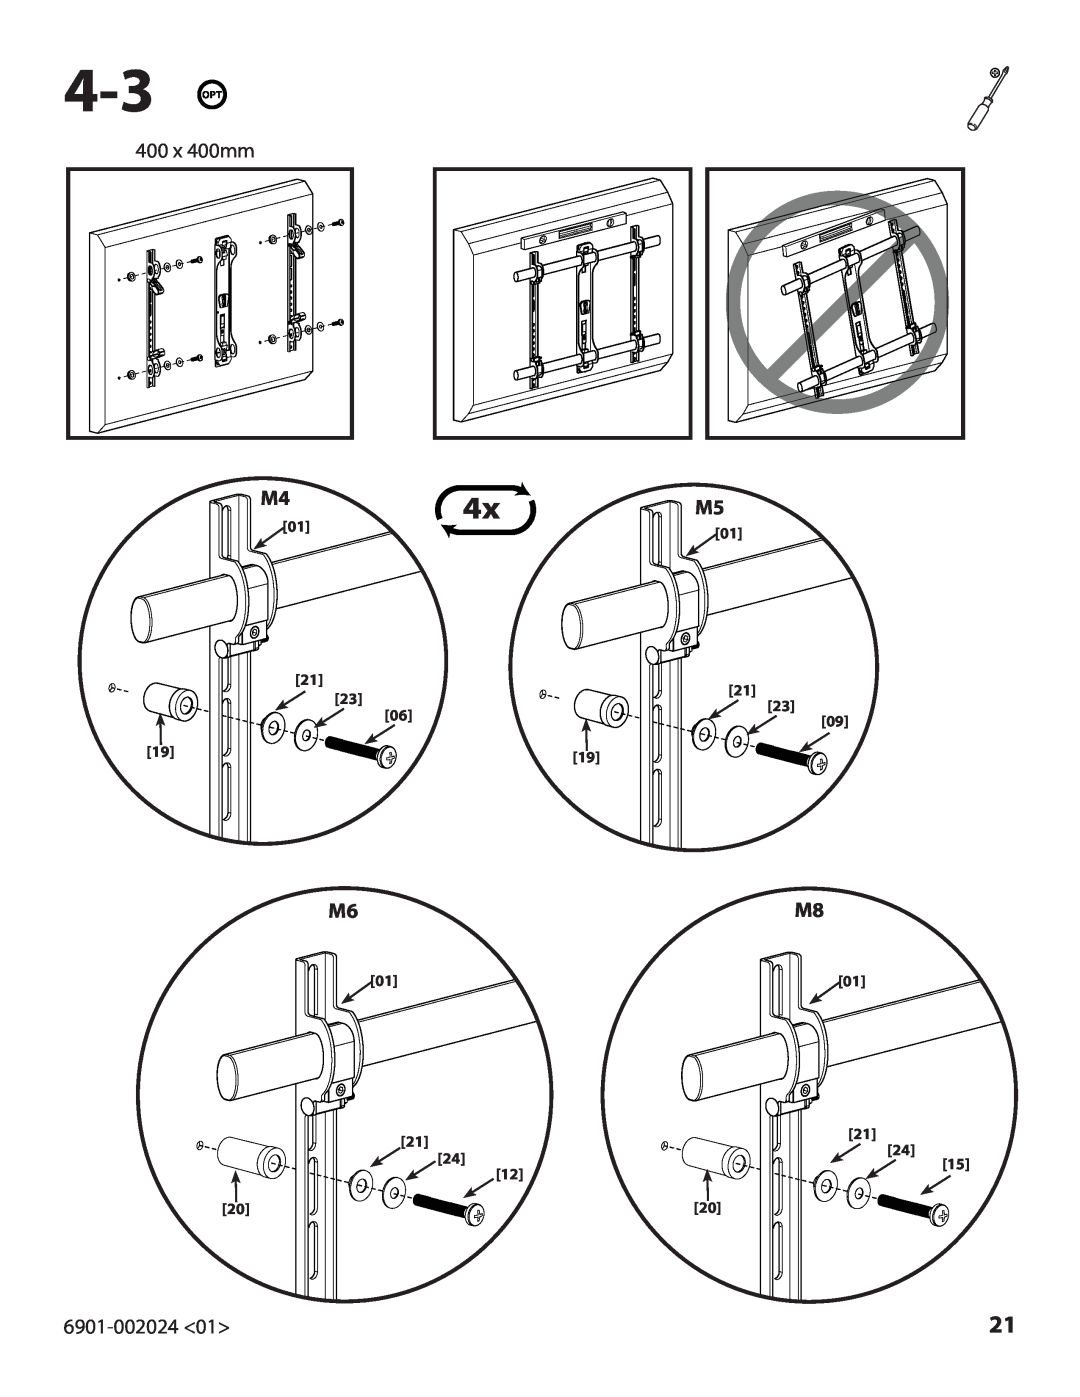 Sanus Systems VLF210 important safety instructions 400 x 400mm, 6901-002024<01>, 21 23 09 19 